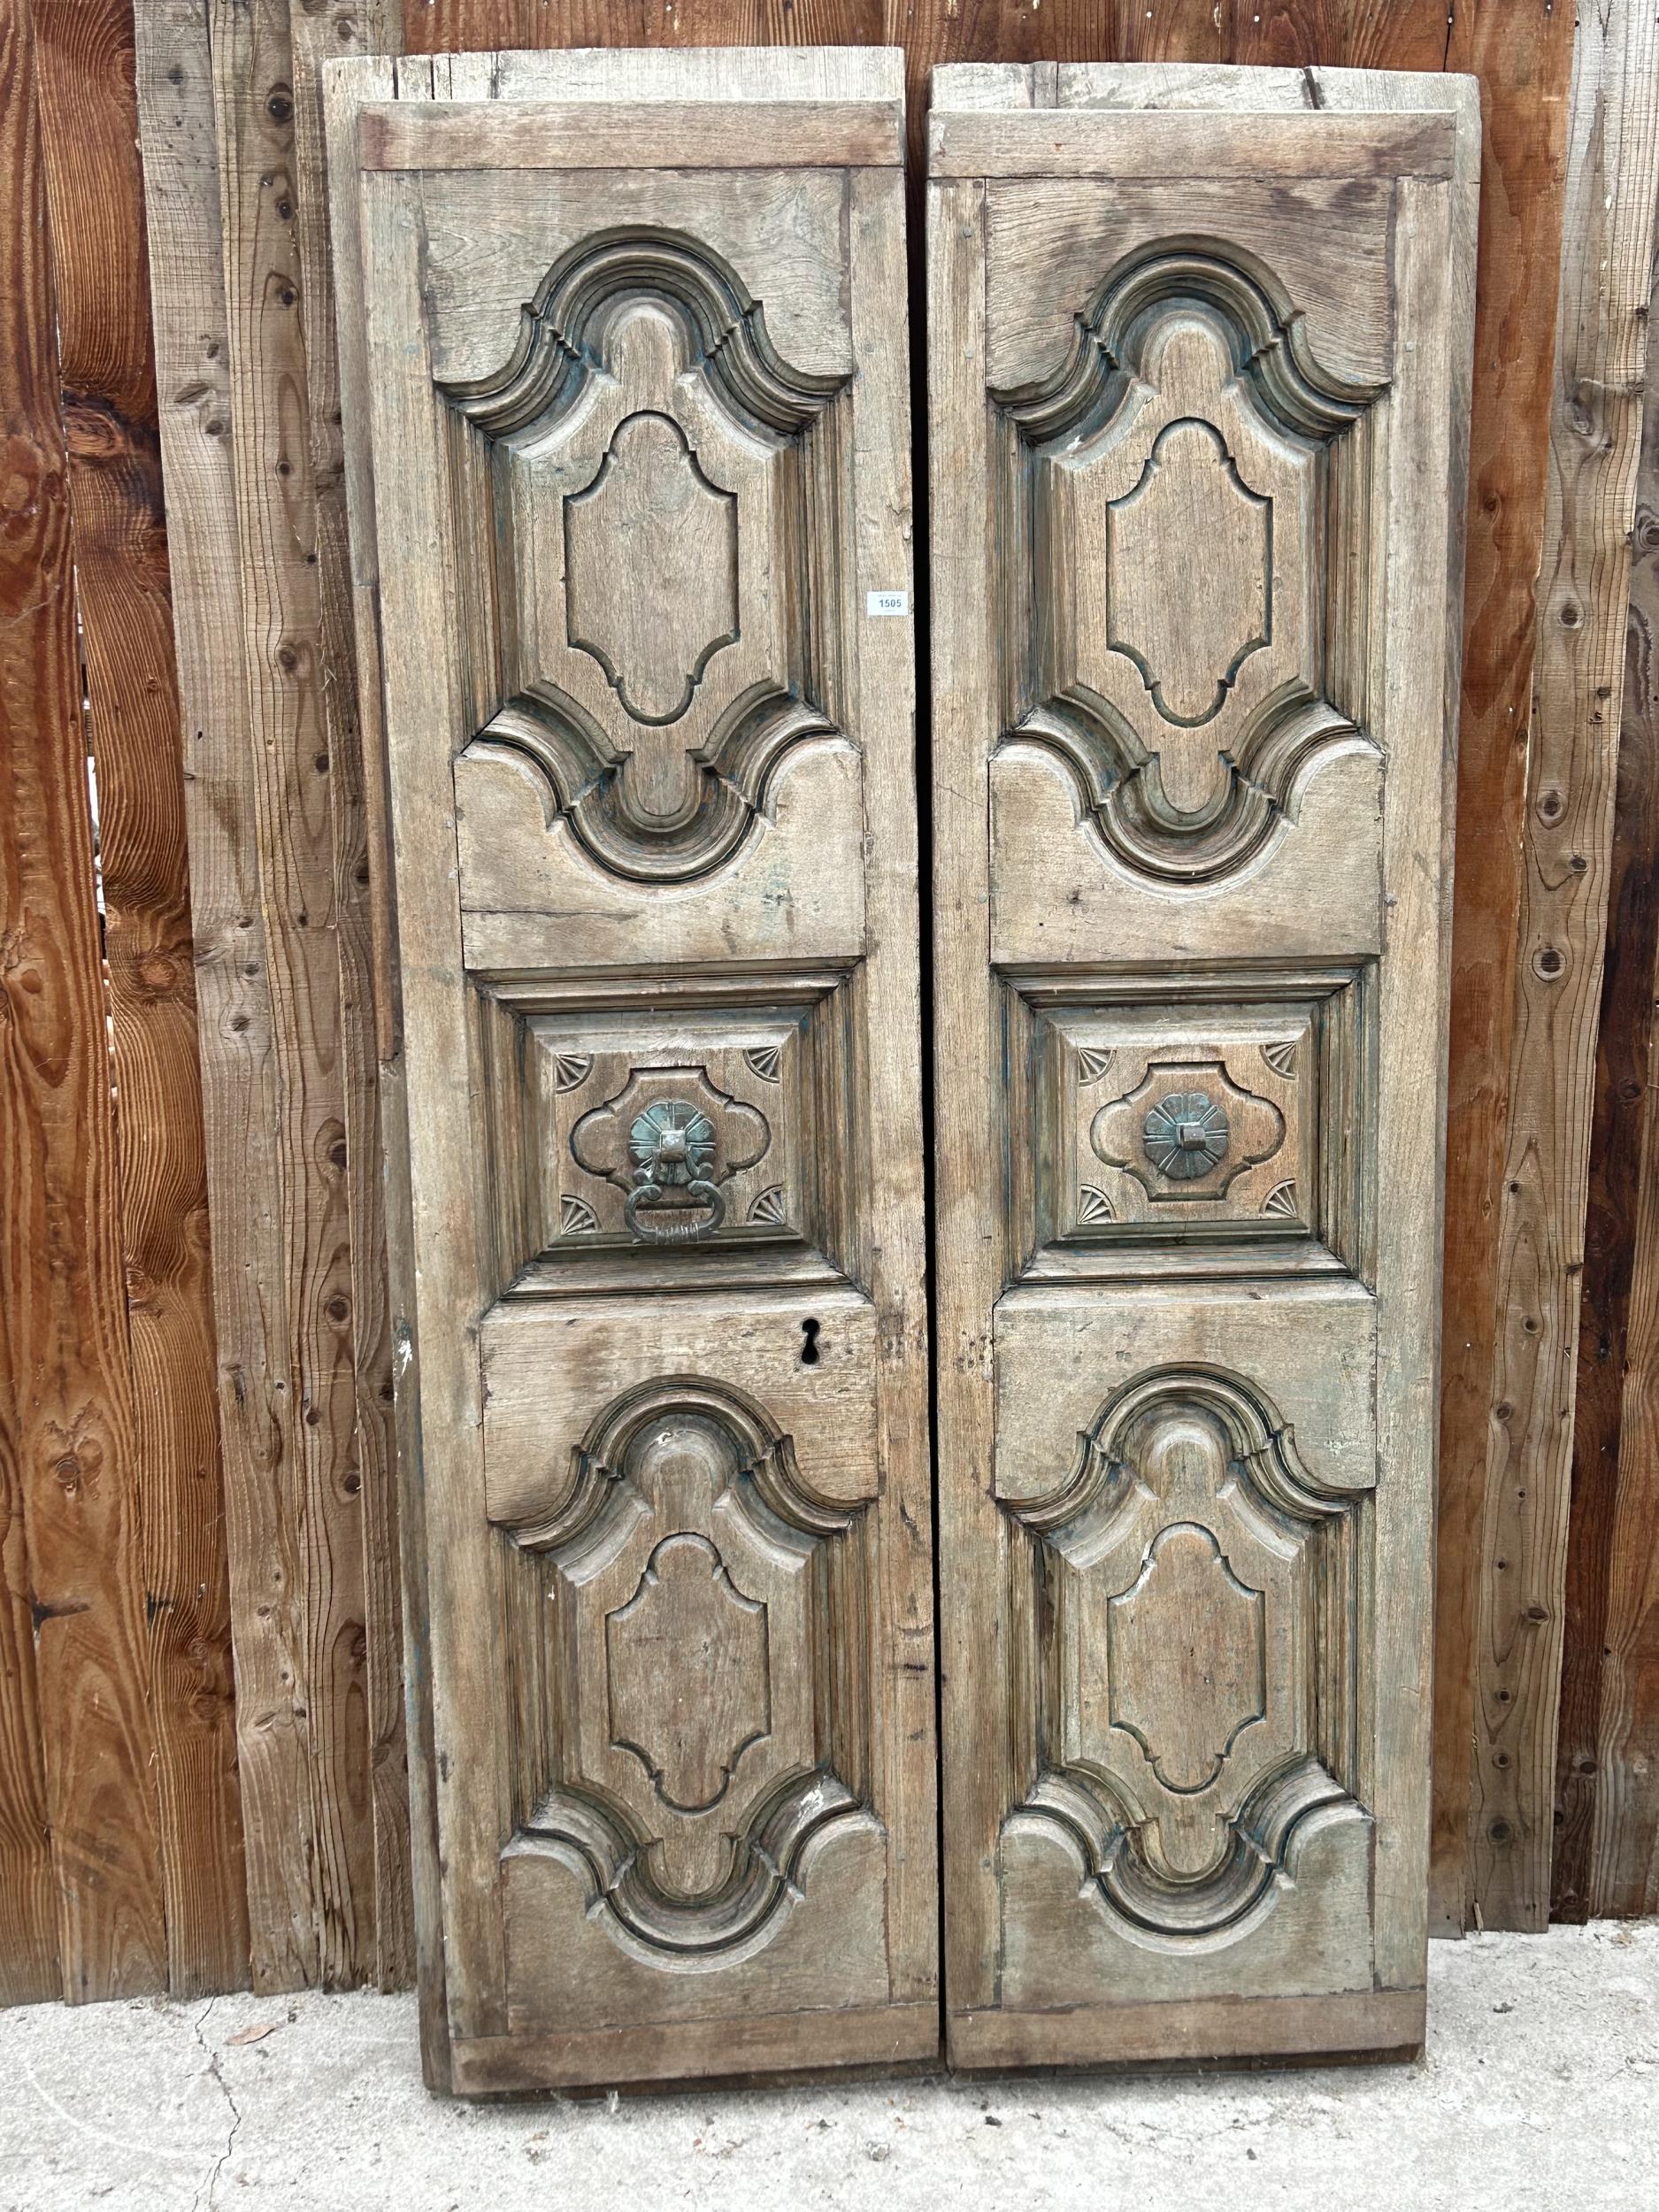 A PAIR OF INDIAN HARDWOOD PANELLED DOORS WITH BRASS HANDLES (ONE PIECE MISSING) 77 X 41"